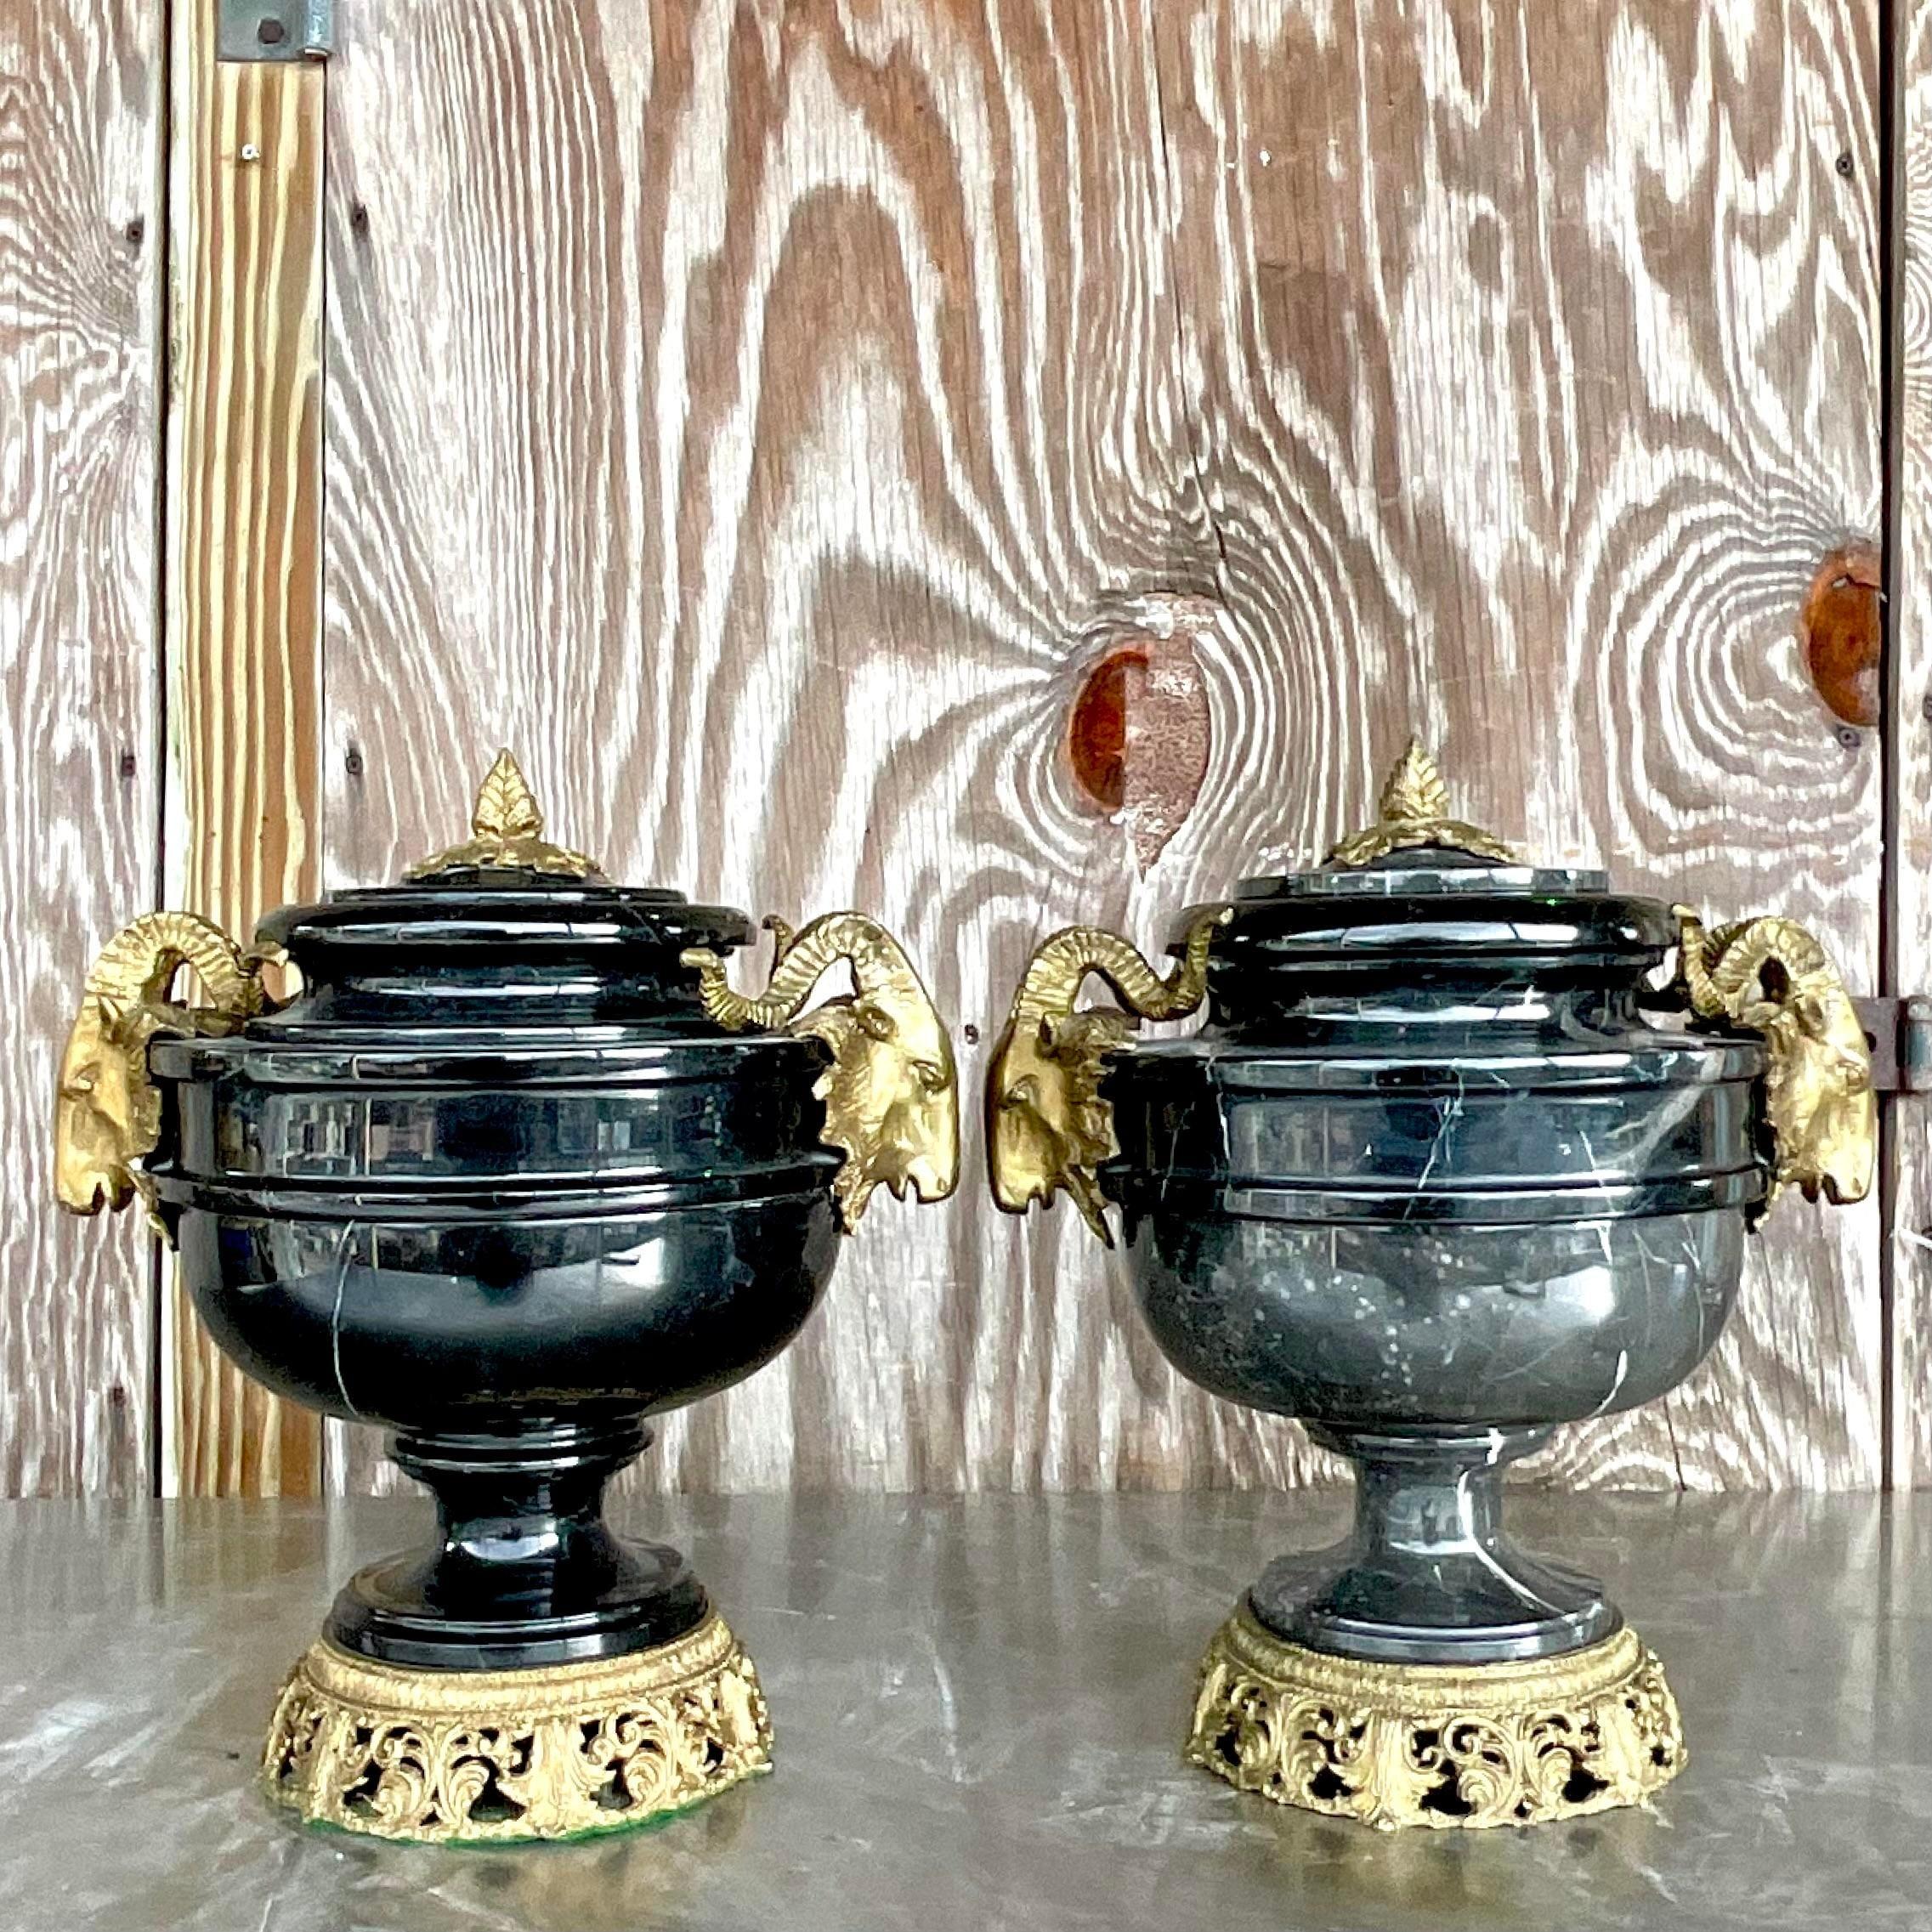 American Vintage Boho Black Marble and Brass Ram’s Head Lidded Urns - a Pair For Sale